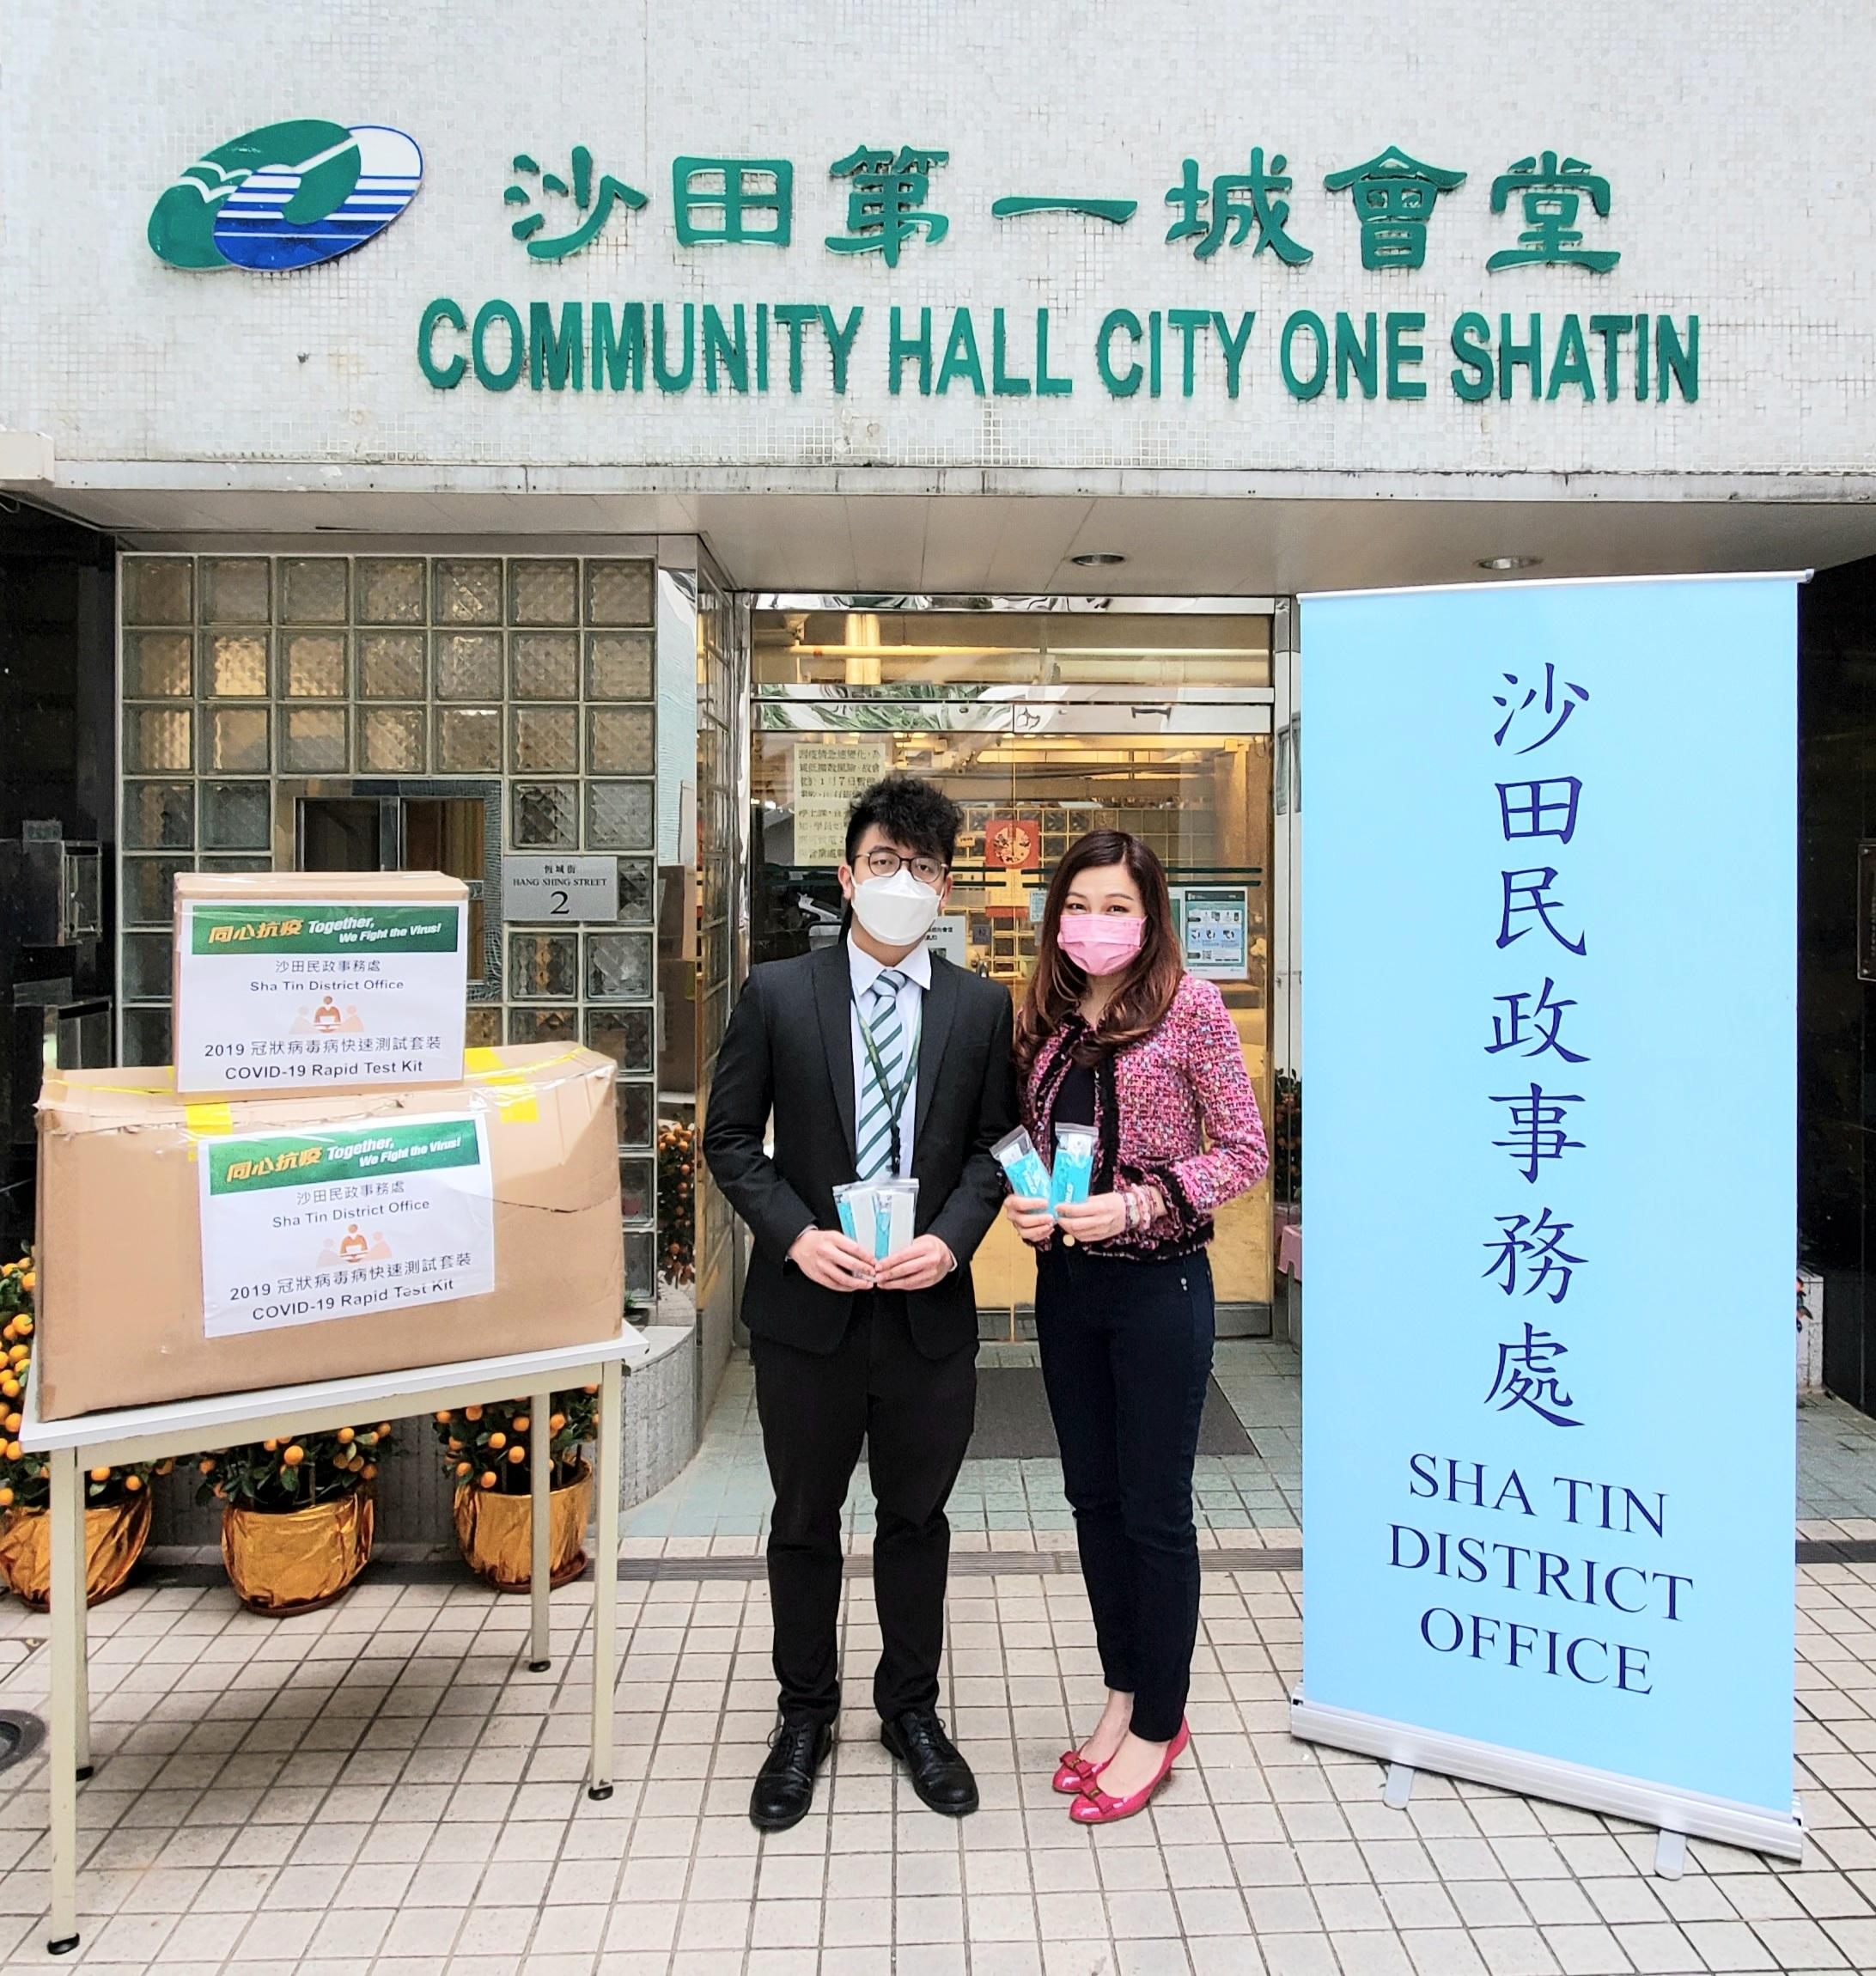 The Sha Tin District Office today (February 13) distributed rapid test kits to cleansing workers and property management staff working in the affected buildings of City One Shatin for voluntary testing through the property management company. 
